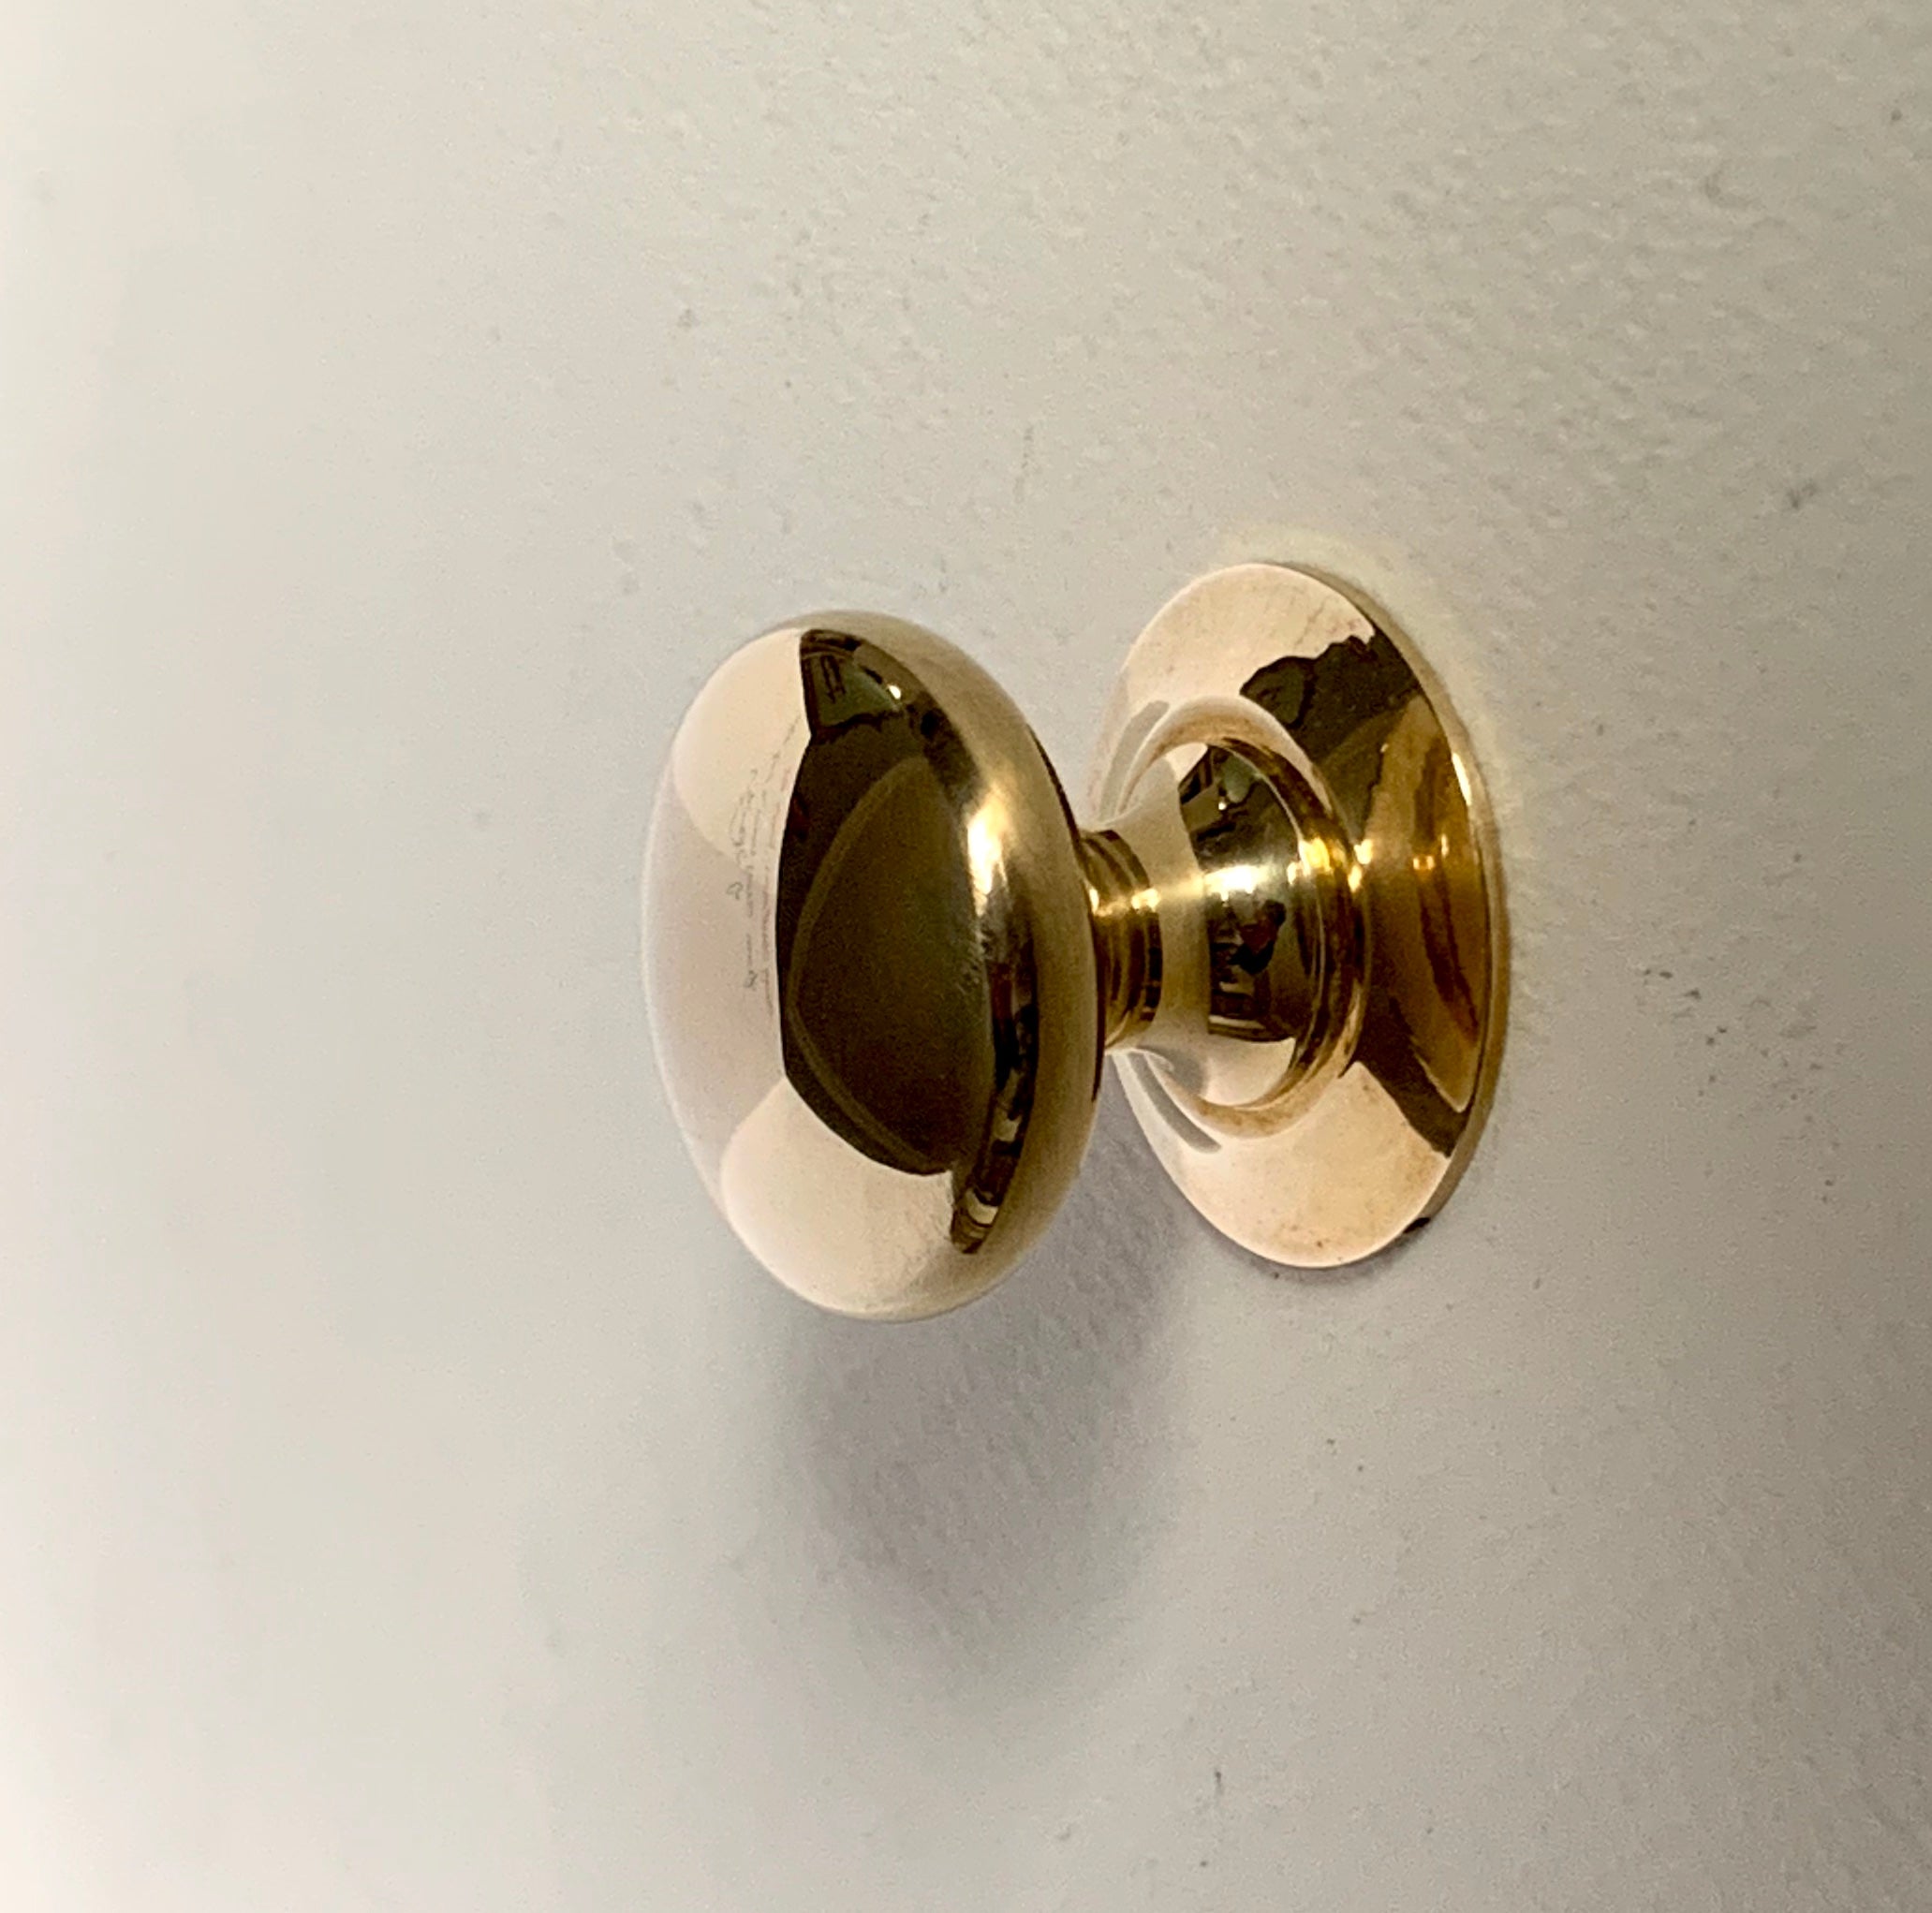 Polished Brass Cupboard Knob with Backplate, 1.25" (32mm) diameter